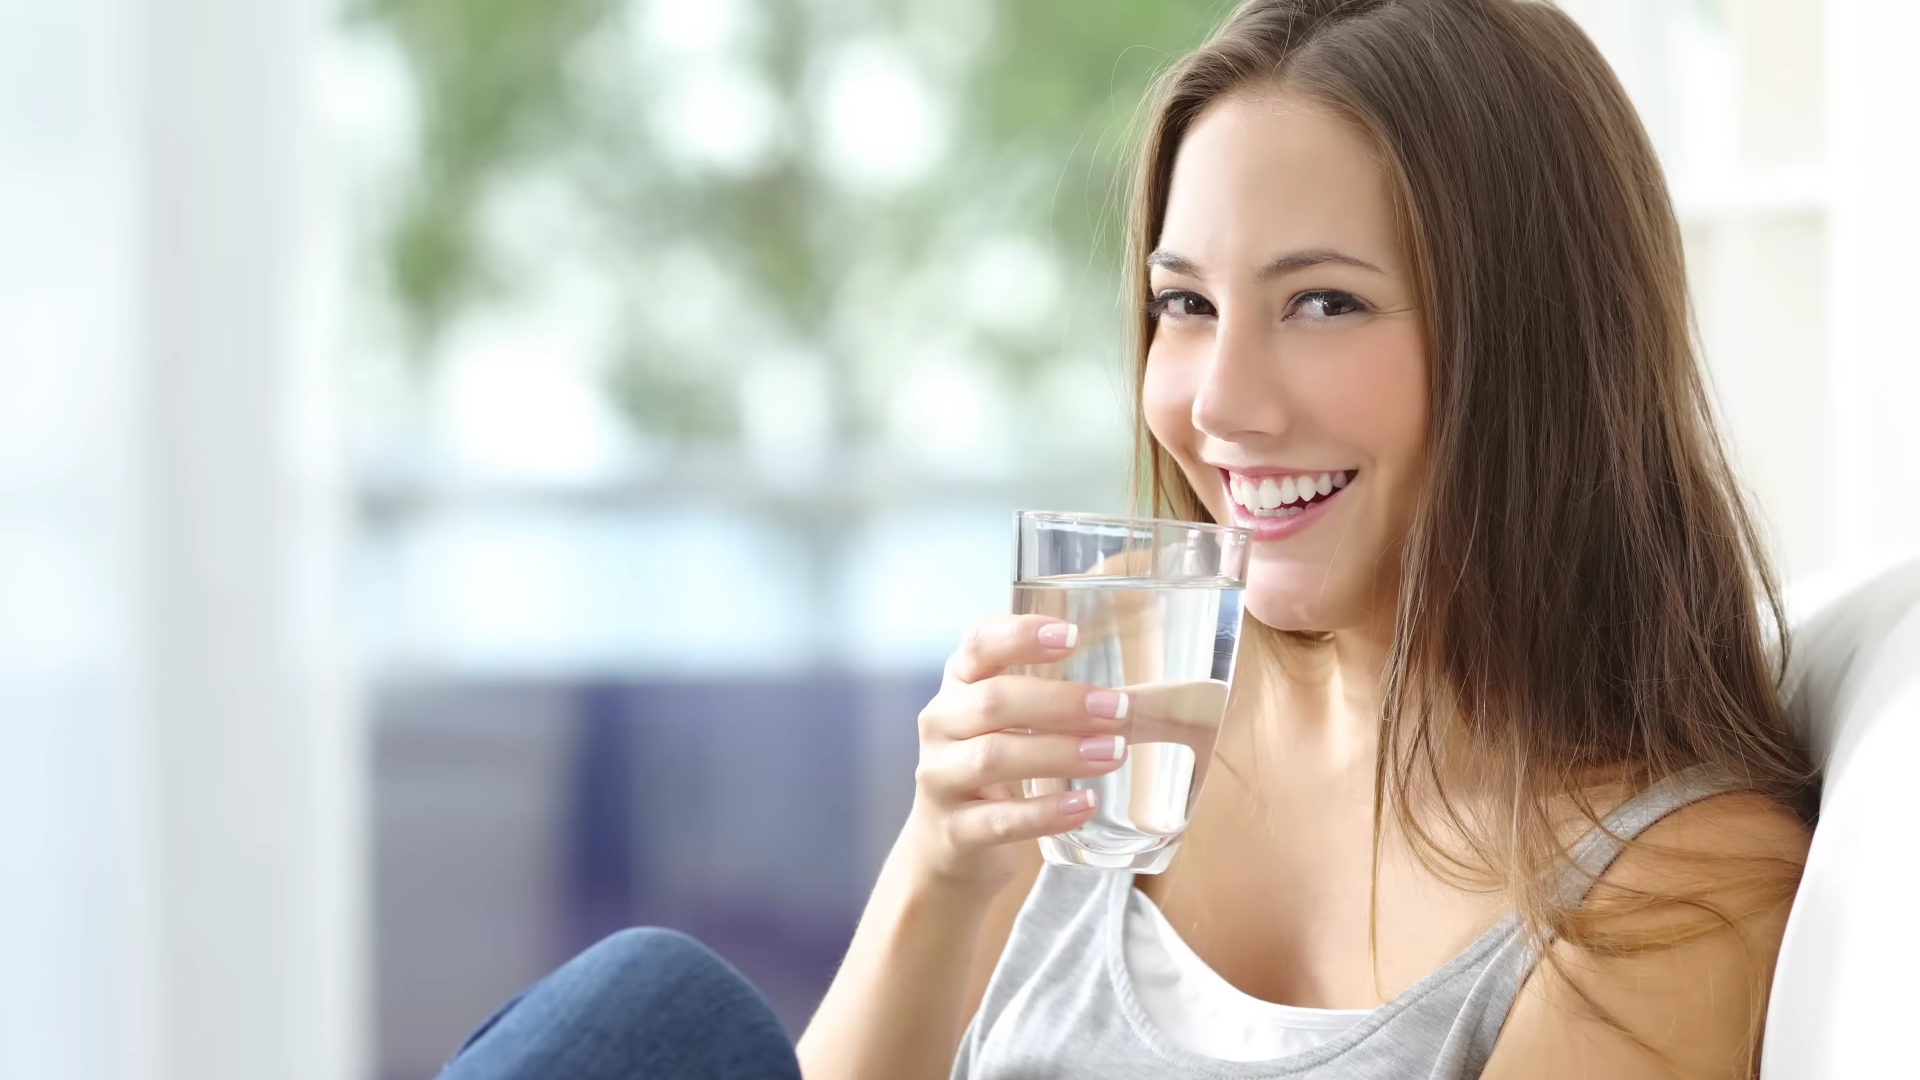 146-8-powerful-health-benefits-of-drinking-water-00-04-28